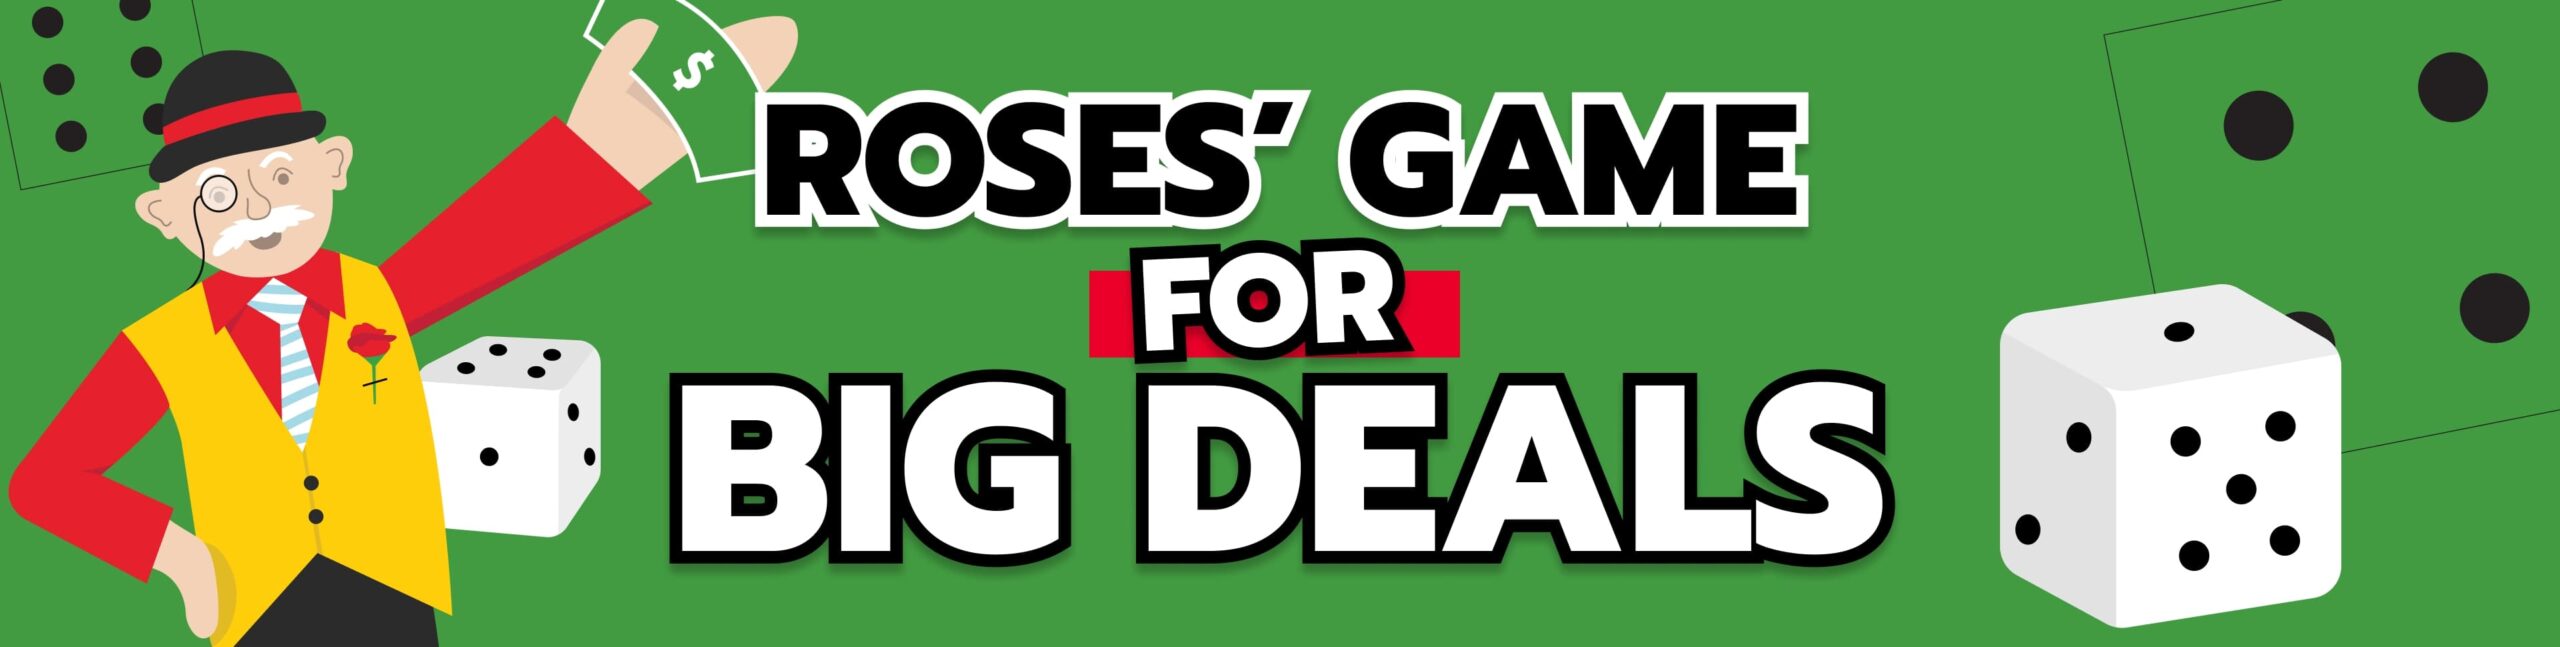 Banner with an illustration of an older gentleman wearing a monocle, holding a dollar bill, with two large dice beside him. Headline reads “Roses’ Game for Big Deals.”